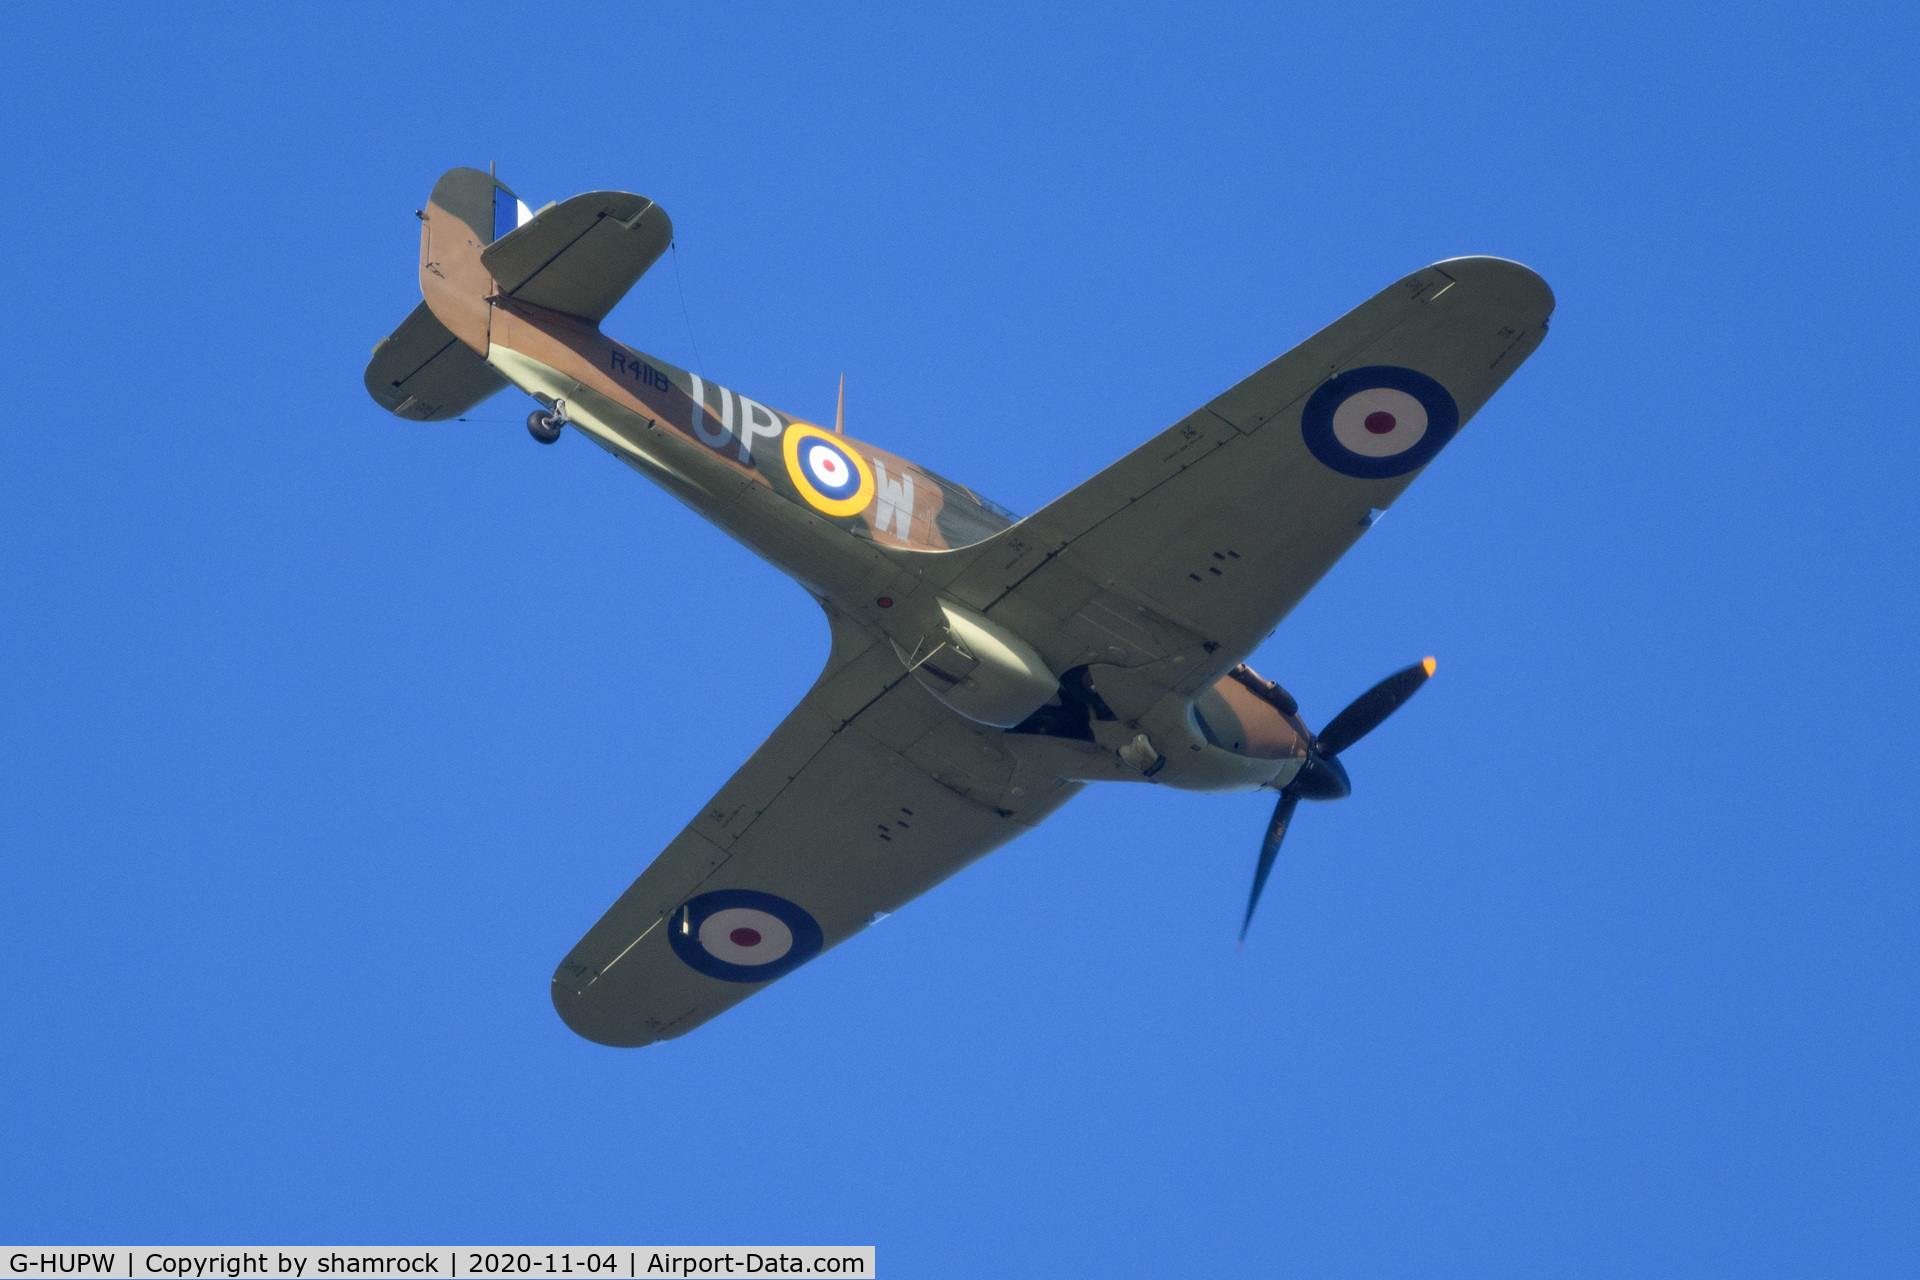 G-HUPW, 1940 Hawker Hurricane I C/N G592301, Over Snettisham shore, this morning.  Fantastic sight and sound!!